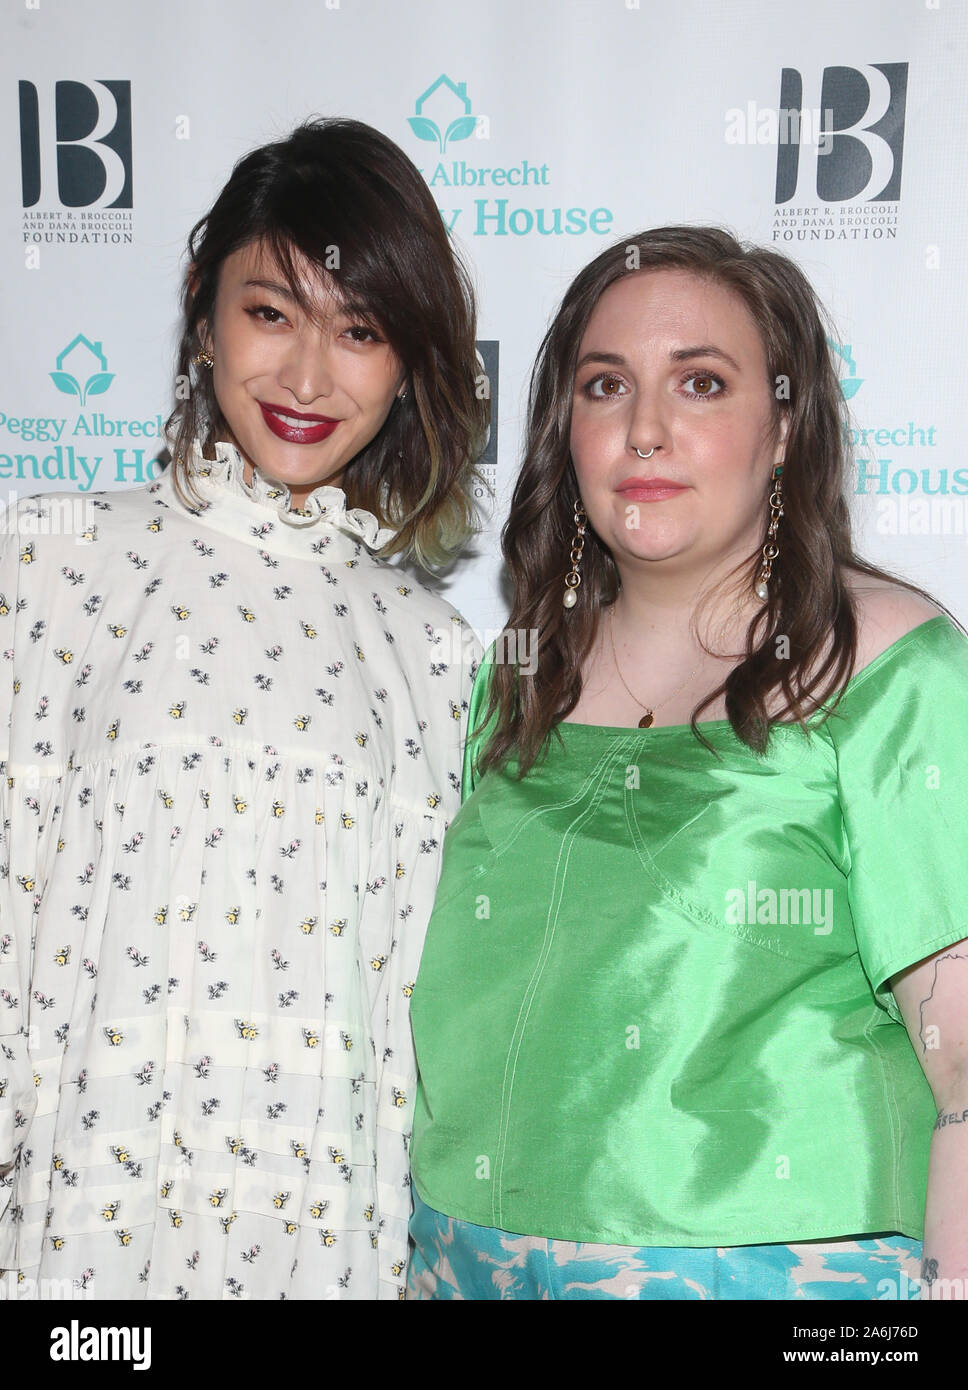 California, USA. 26th Oct, 2019.  Yu Yamada and Lena Dunham, at the Friendly House 30th Annual Awards Luncheon at the Beverly Hilton Hotel in Beverly Hills, California on October 26, 2019. Credit: MediaPunch Inc/Alamy Live News Stock Photo